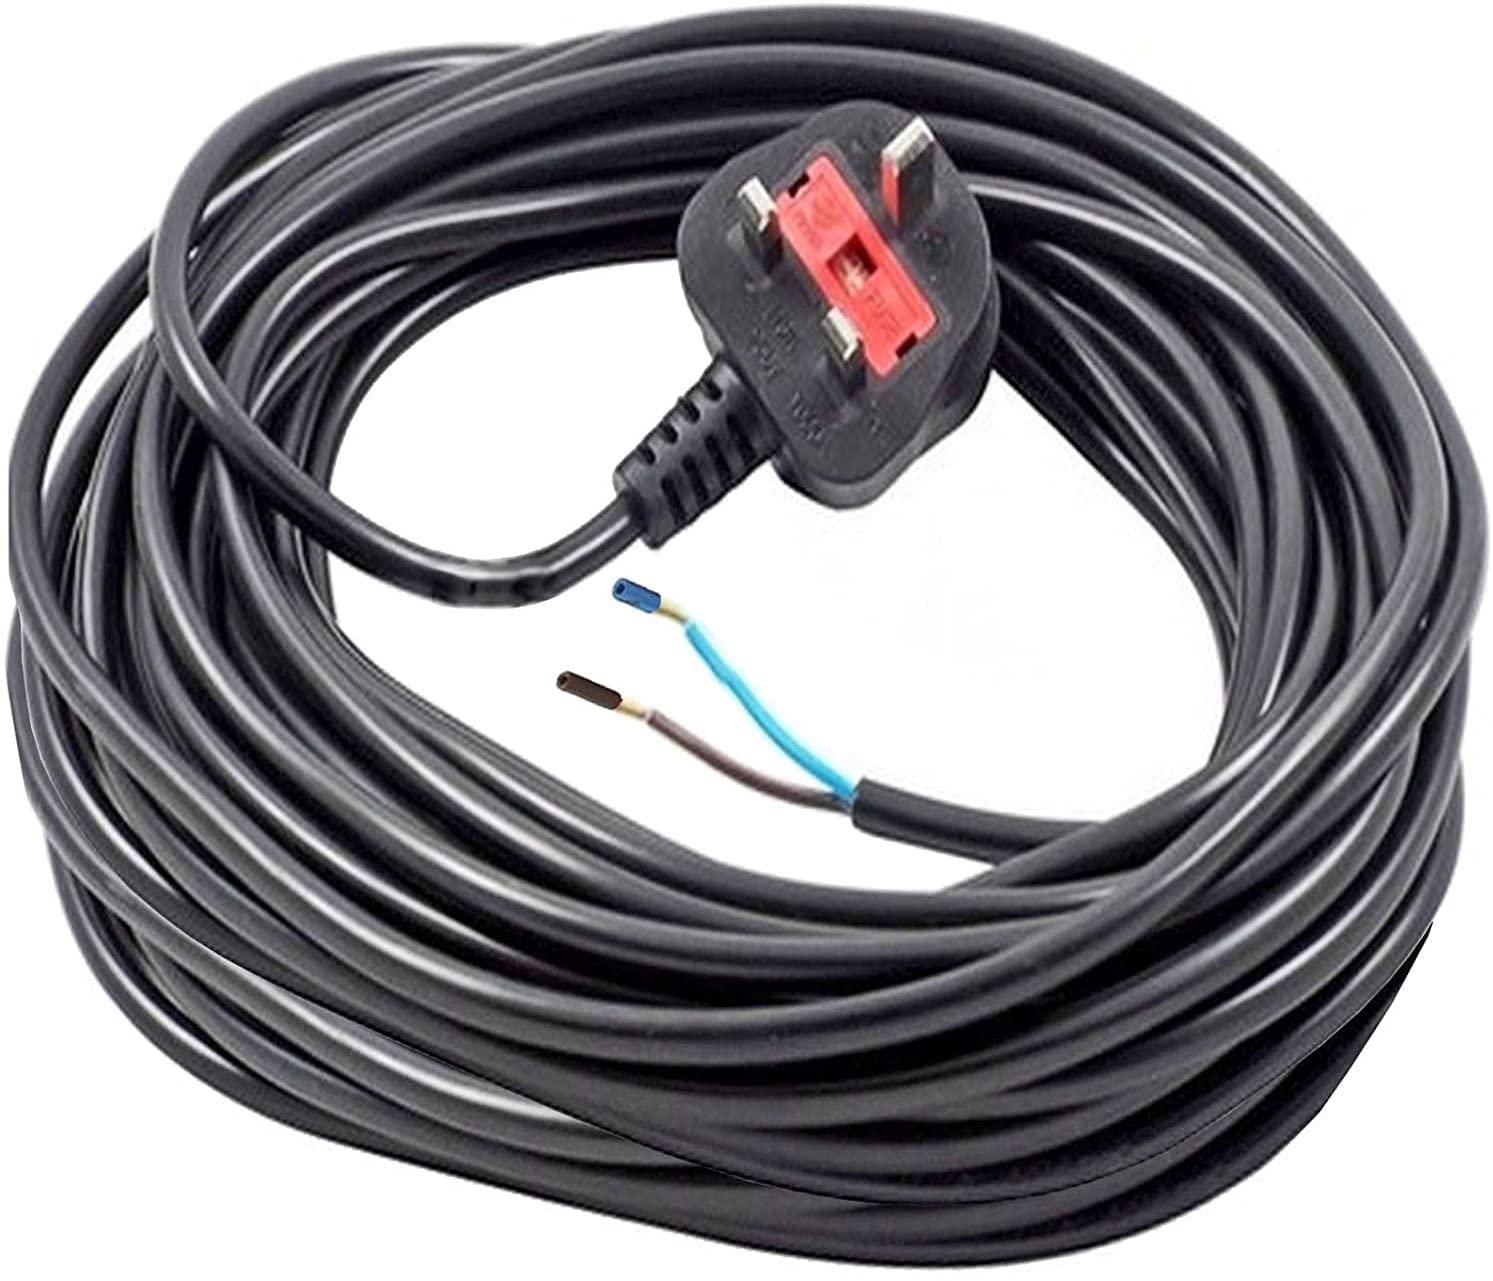 XL Extra Long 12M Metre Black Cable Mains Power Lead for Hoover Vacuum Cleaner (UK Plug)